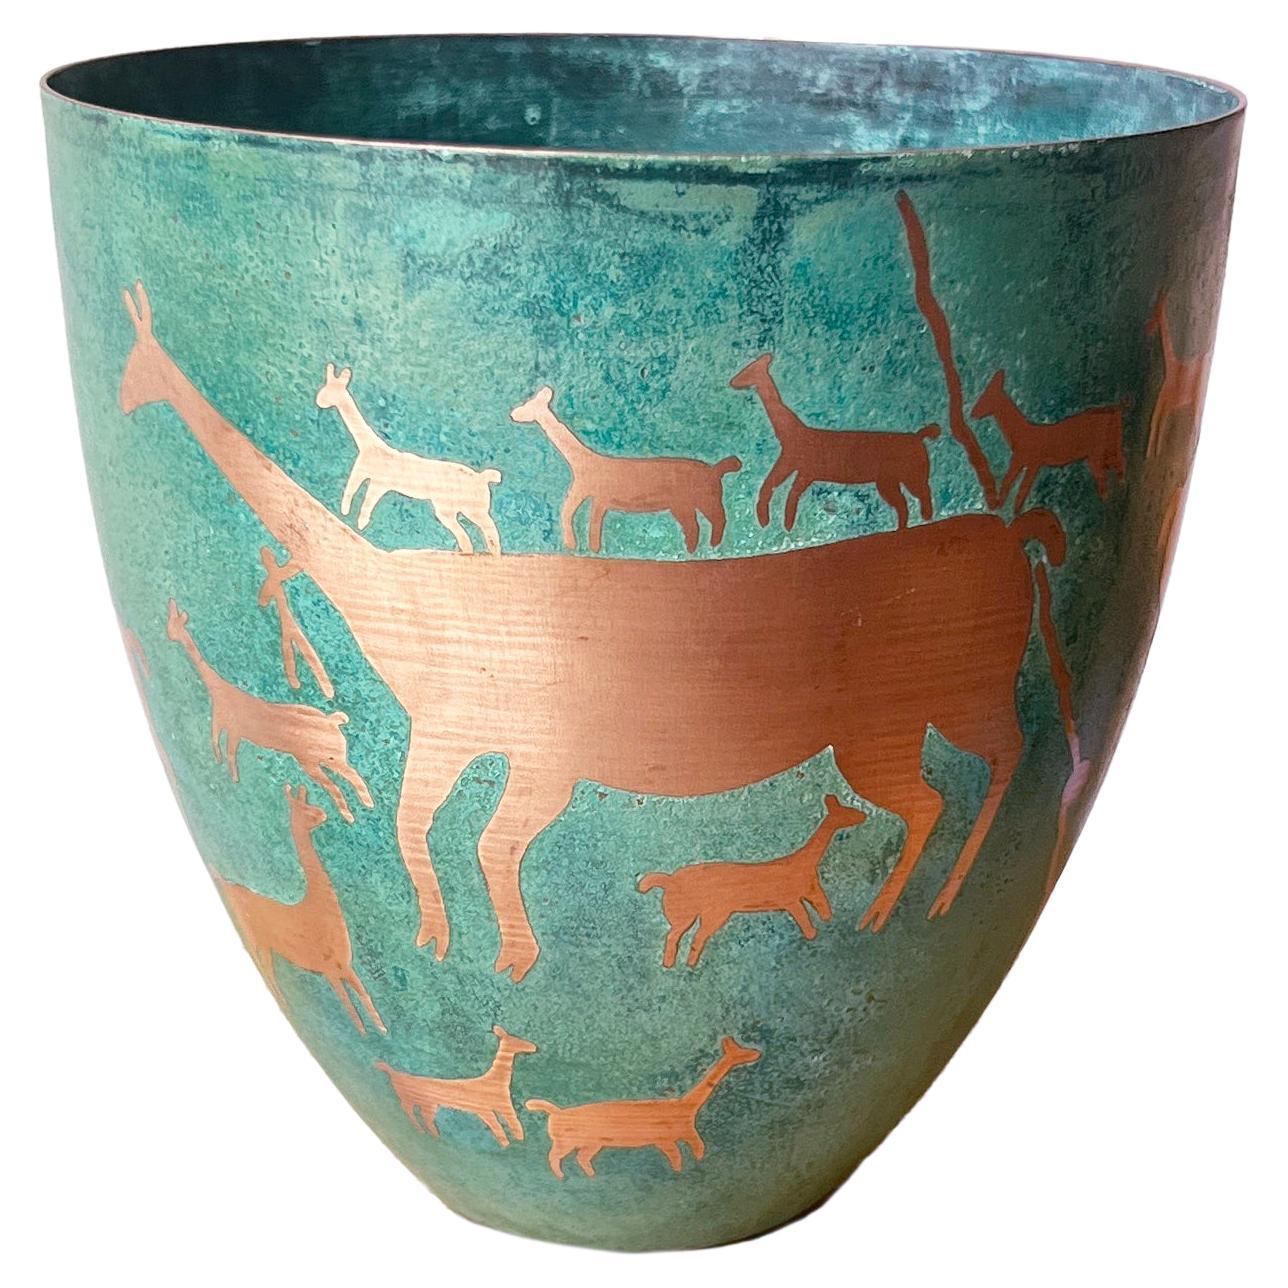 Llama Caravan Oxidized Copper Vessel, Handmade and Etched with Animal Figures For Sale